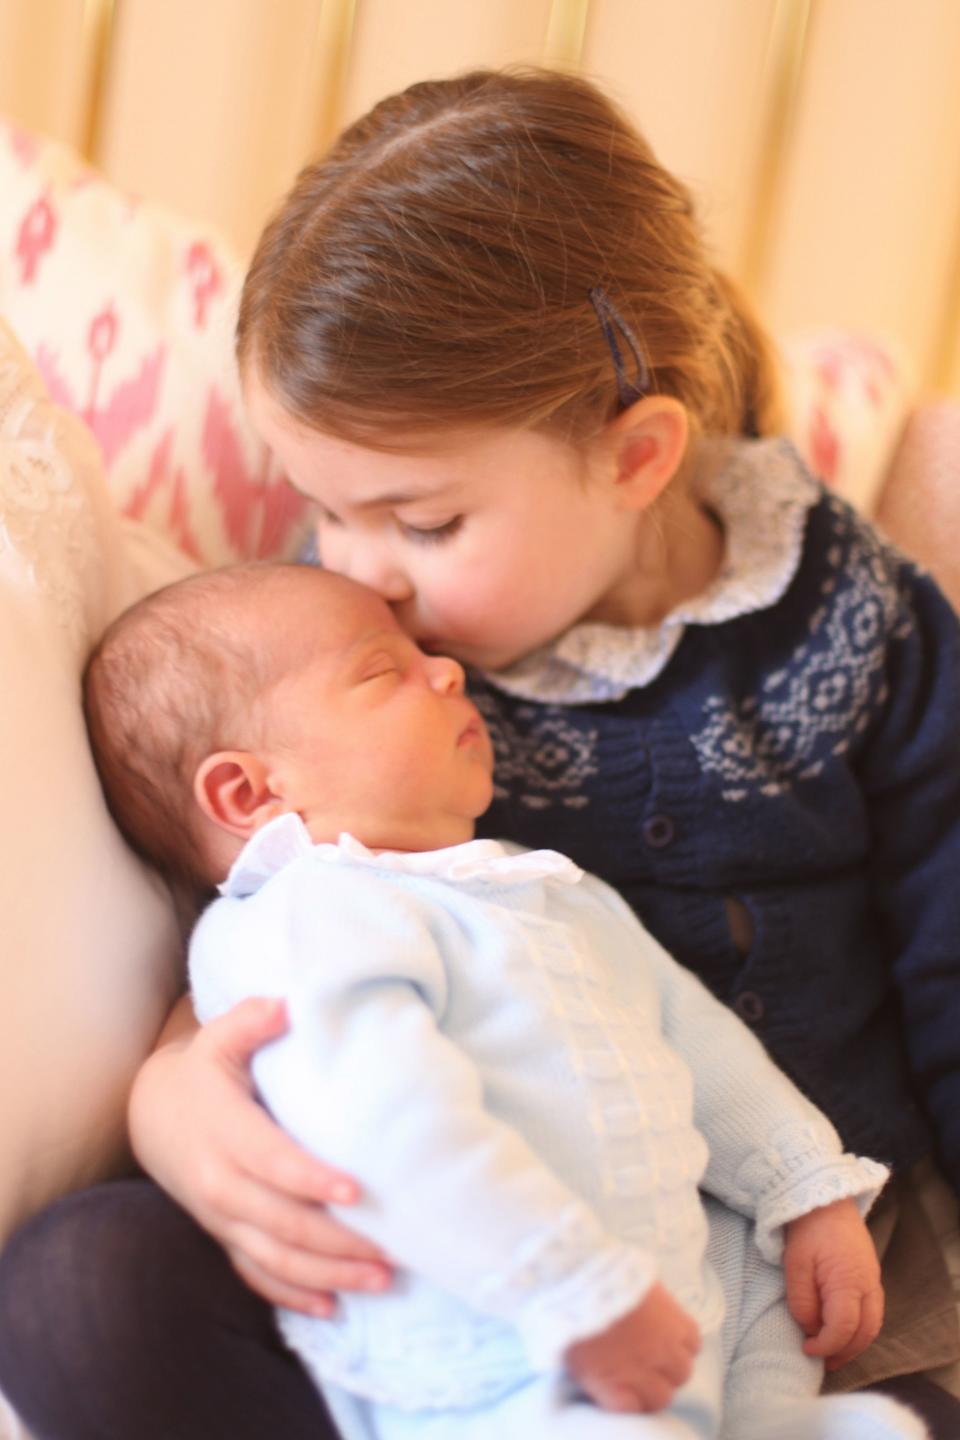 Princess Charlotte with her brother Prince Louis on her third birthday in a photo taken by the Duchess of Cambridge on May 2, 2018 at Kensington Palace.